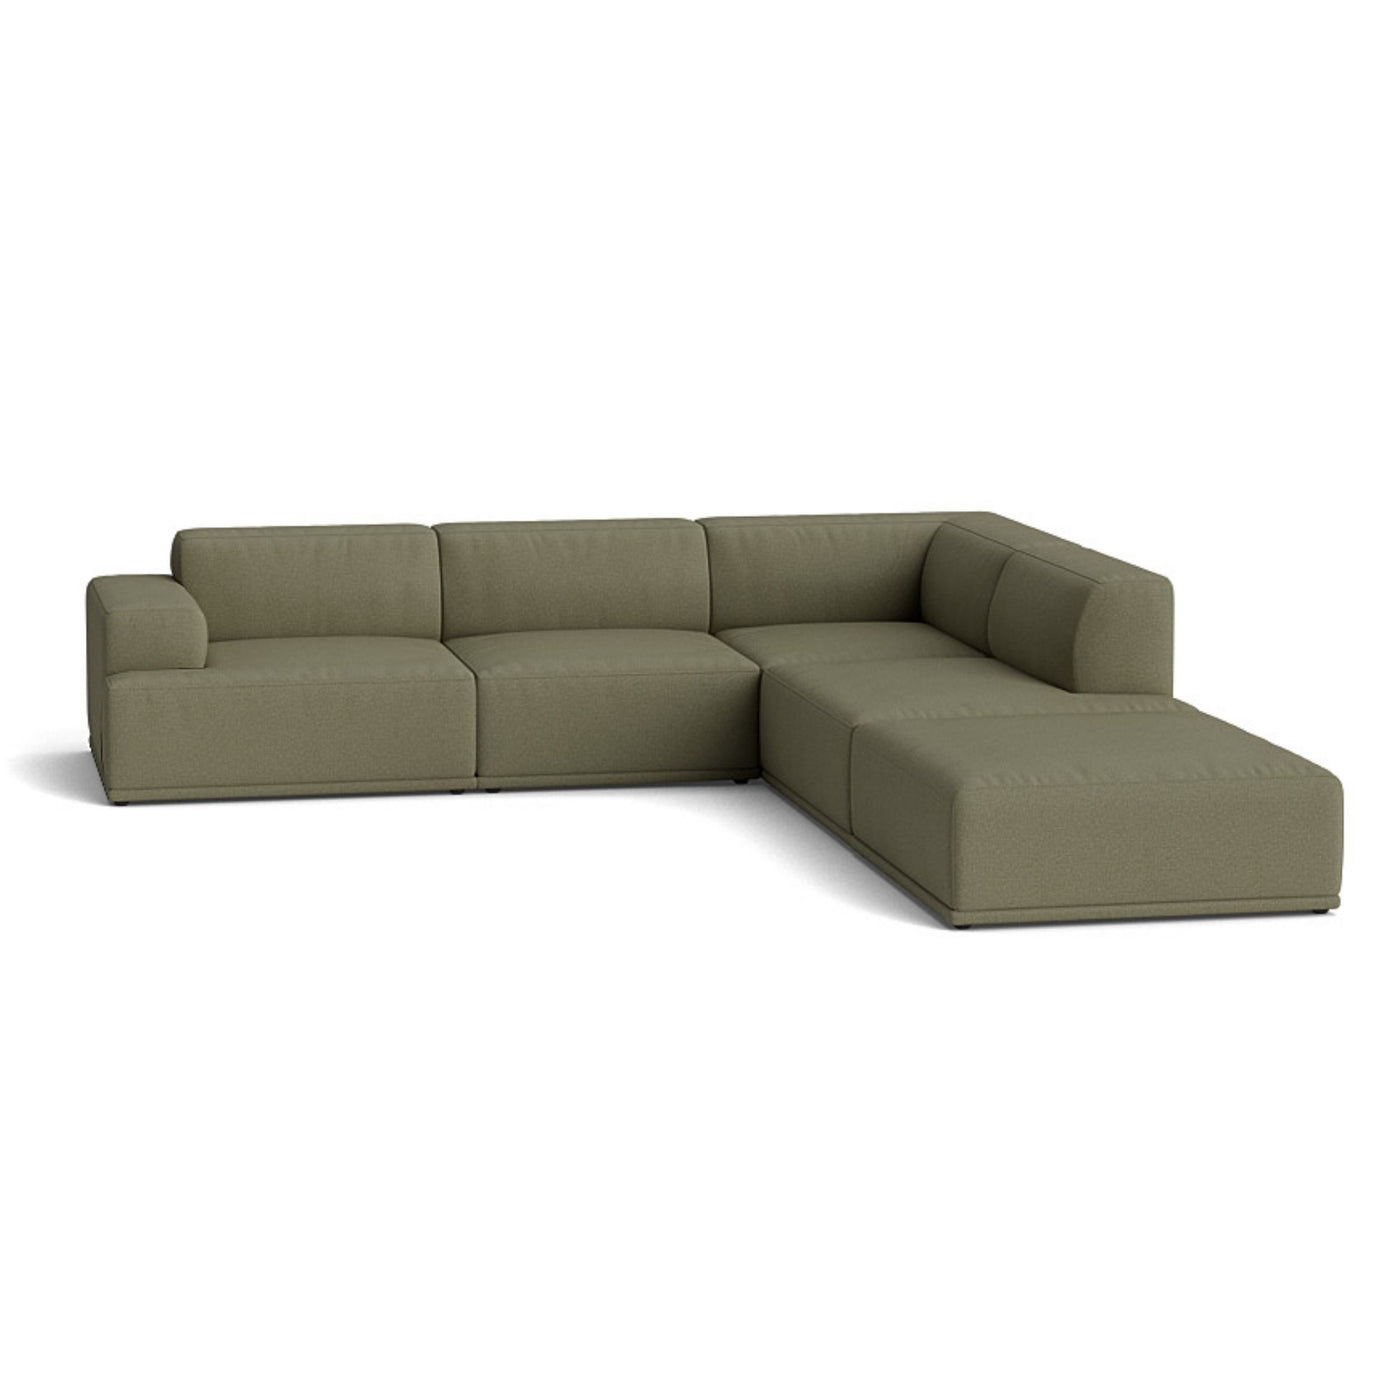 Muuto Connect Soft Modular Corner Sofa, configuration 2. Made-to-order from someday designs. #colour_clay-17